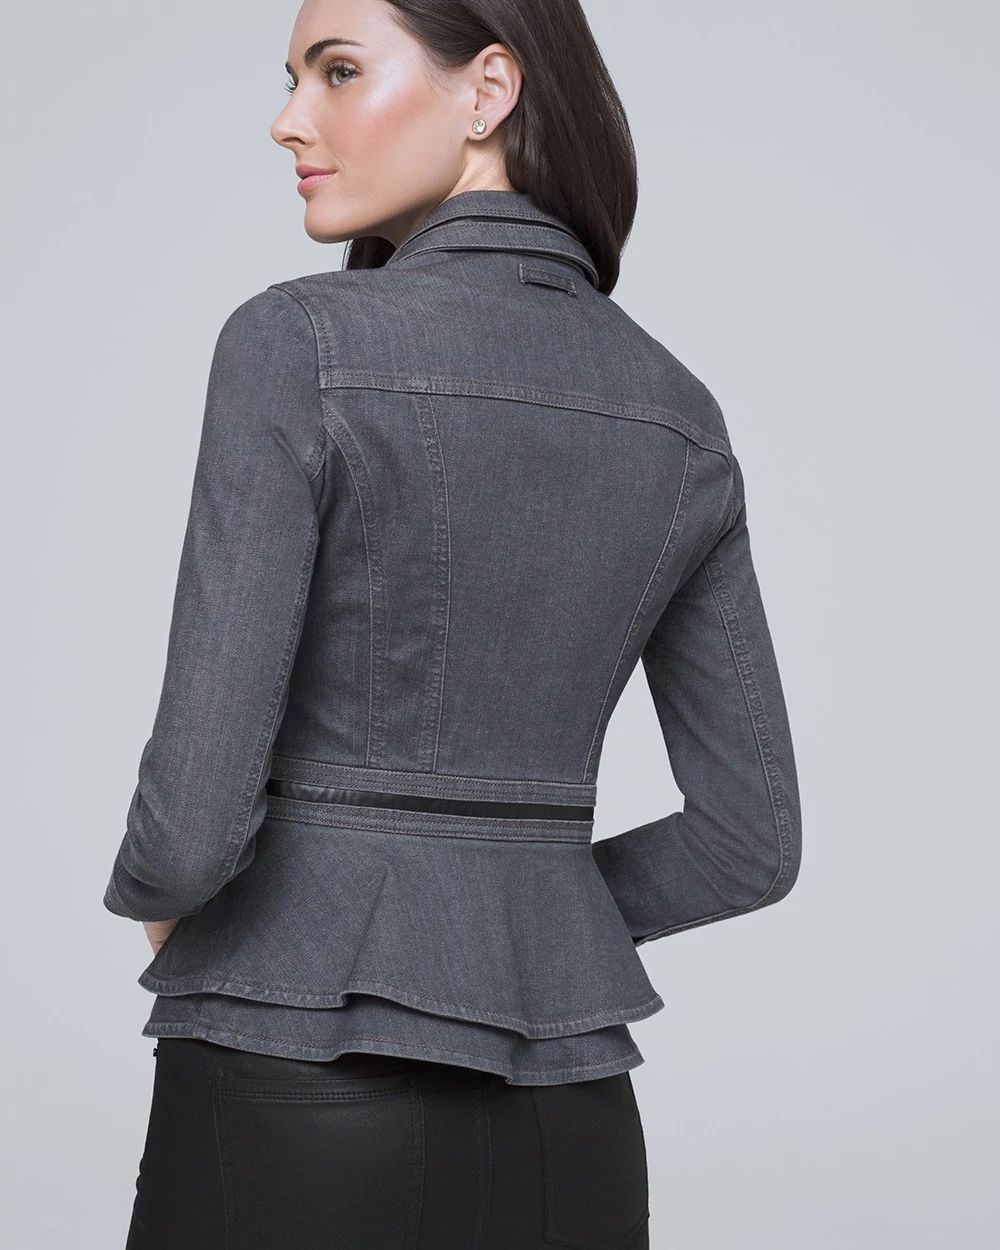 Peplum Casual Jacket with Faux Leather Trim click to view larger image.